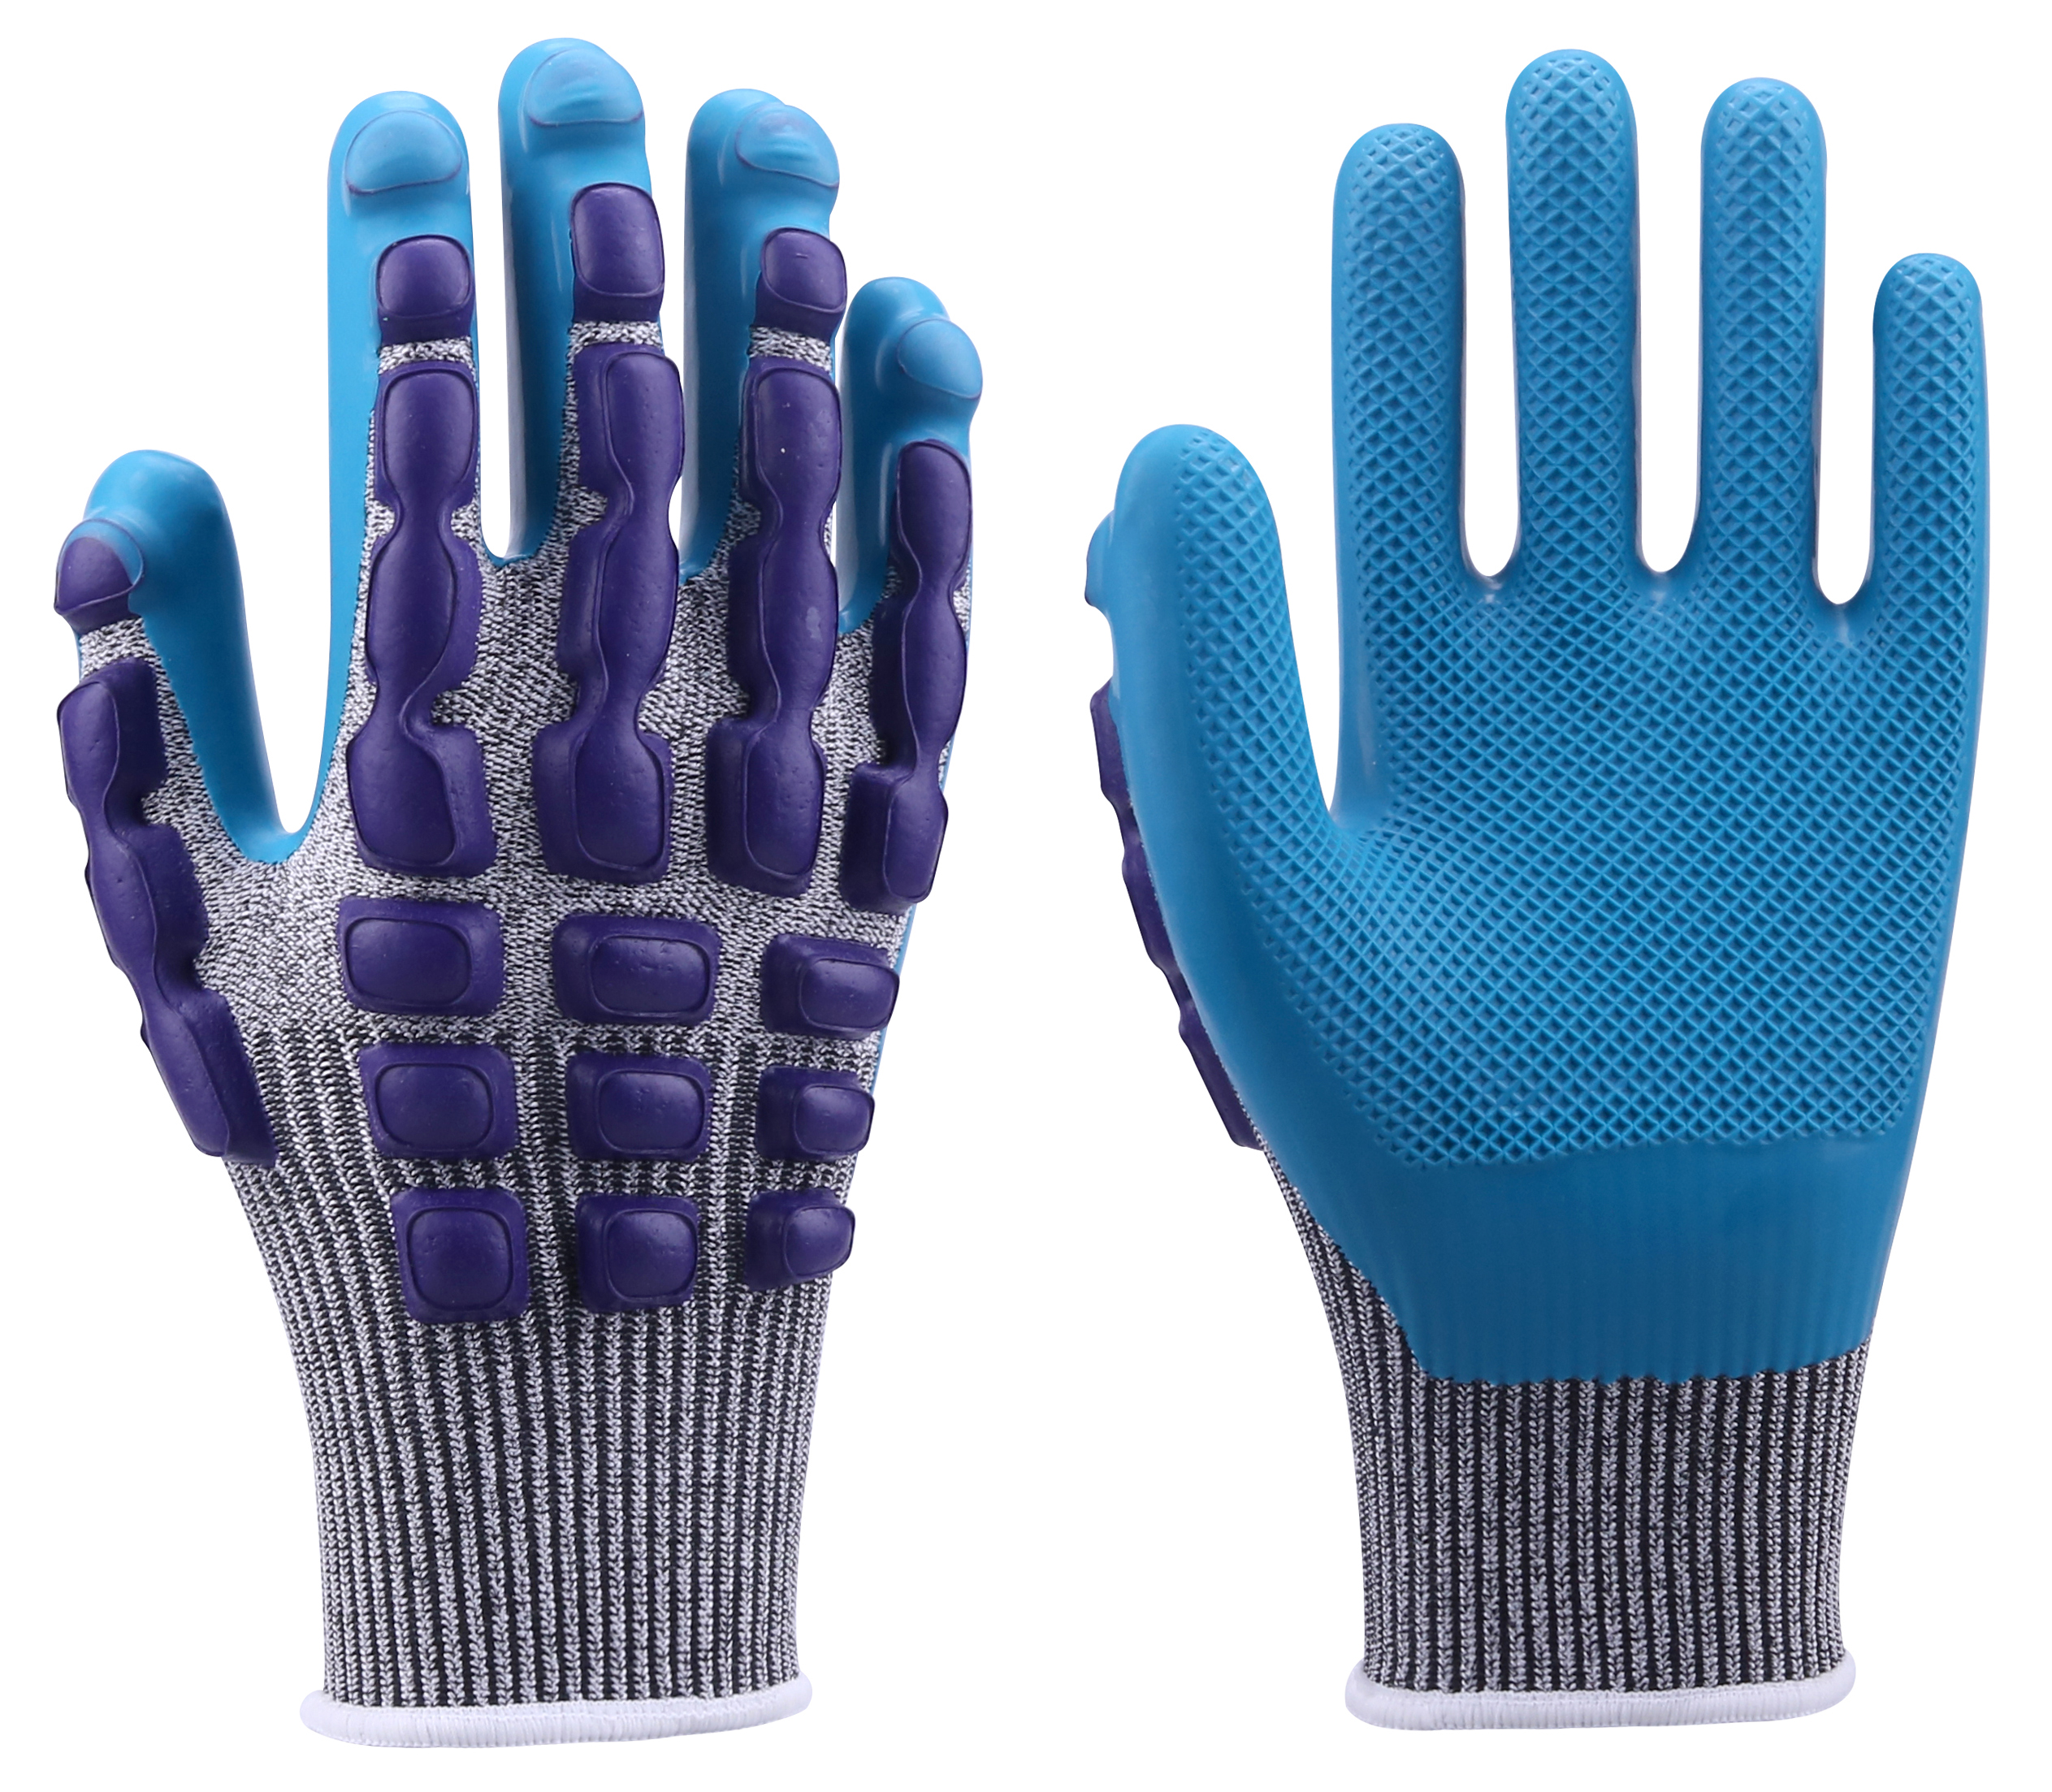 13G HPPE+Spandex+Nylon+Glass Fiber Liner ECO-Latex+Latex Dots Coated Gloves, EN388 3X43CP, ANSI A3 